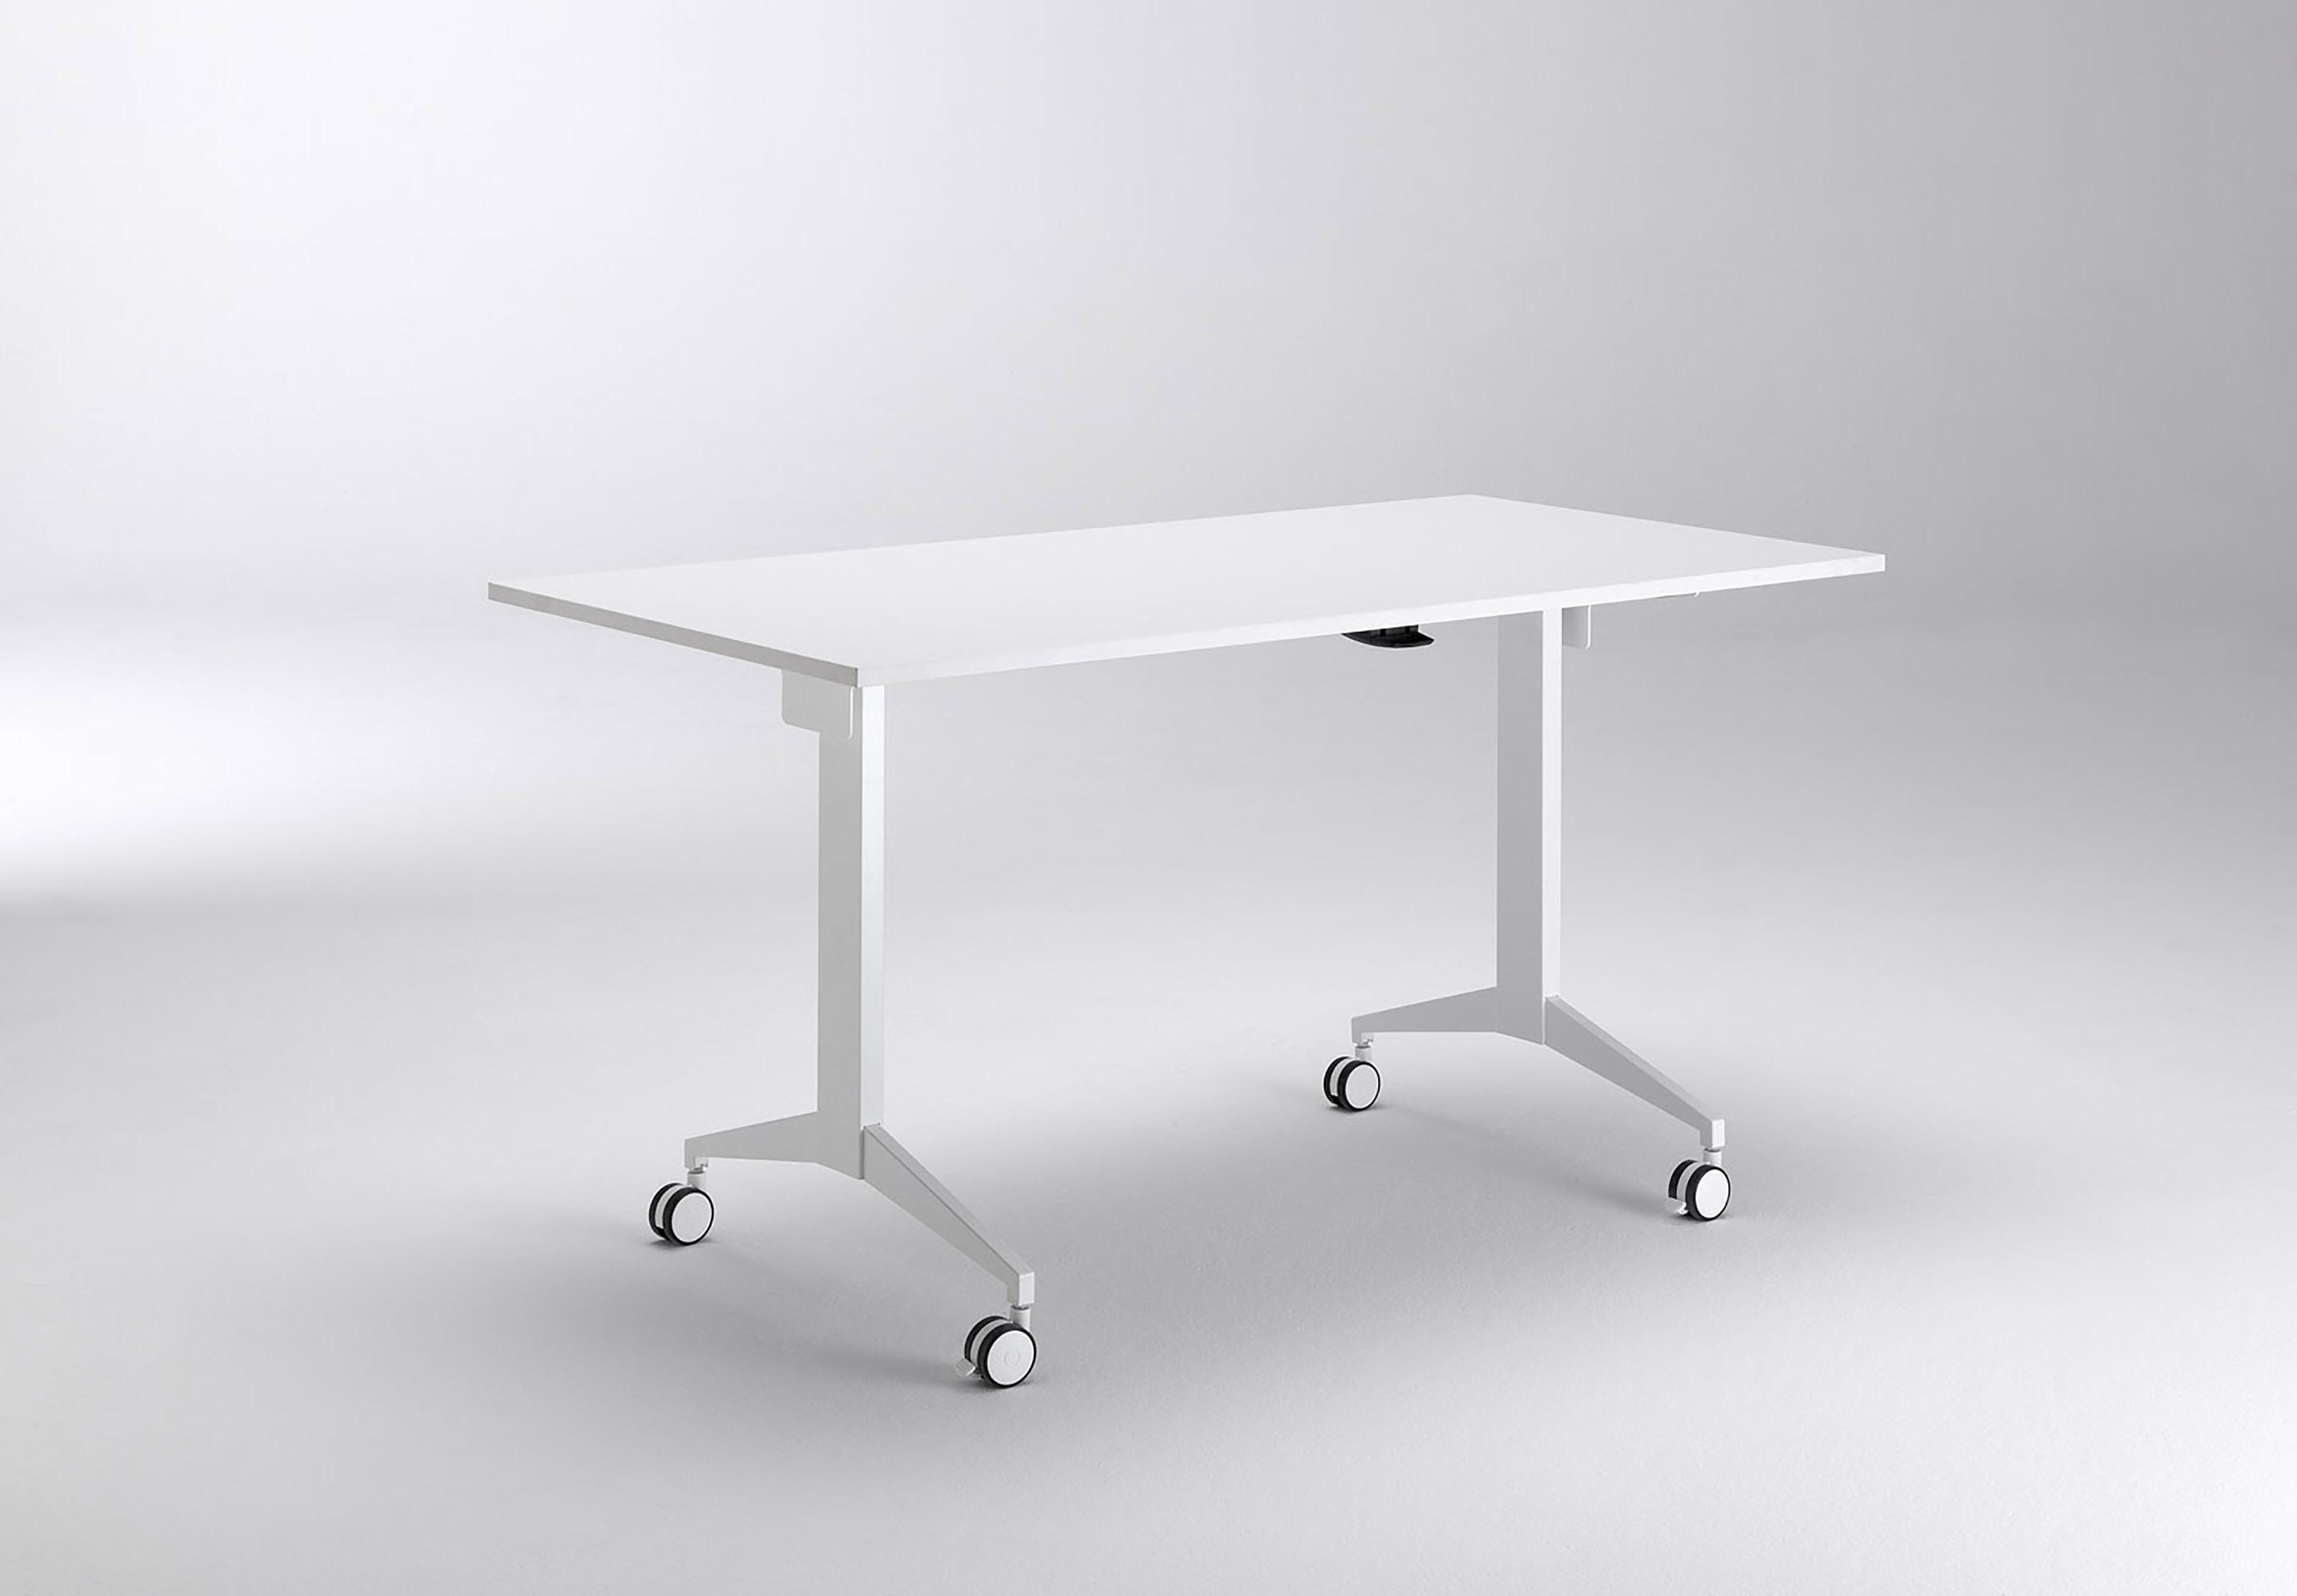 FT4 FOLDING TABLE - Contract tables from Cube Design ...